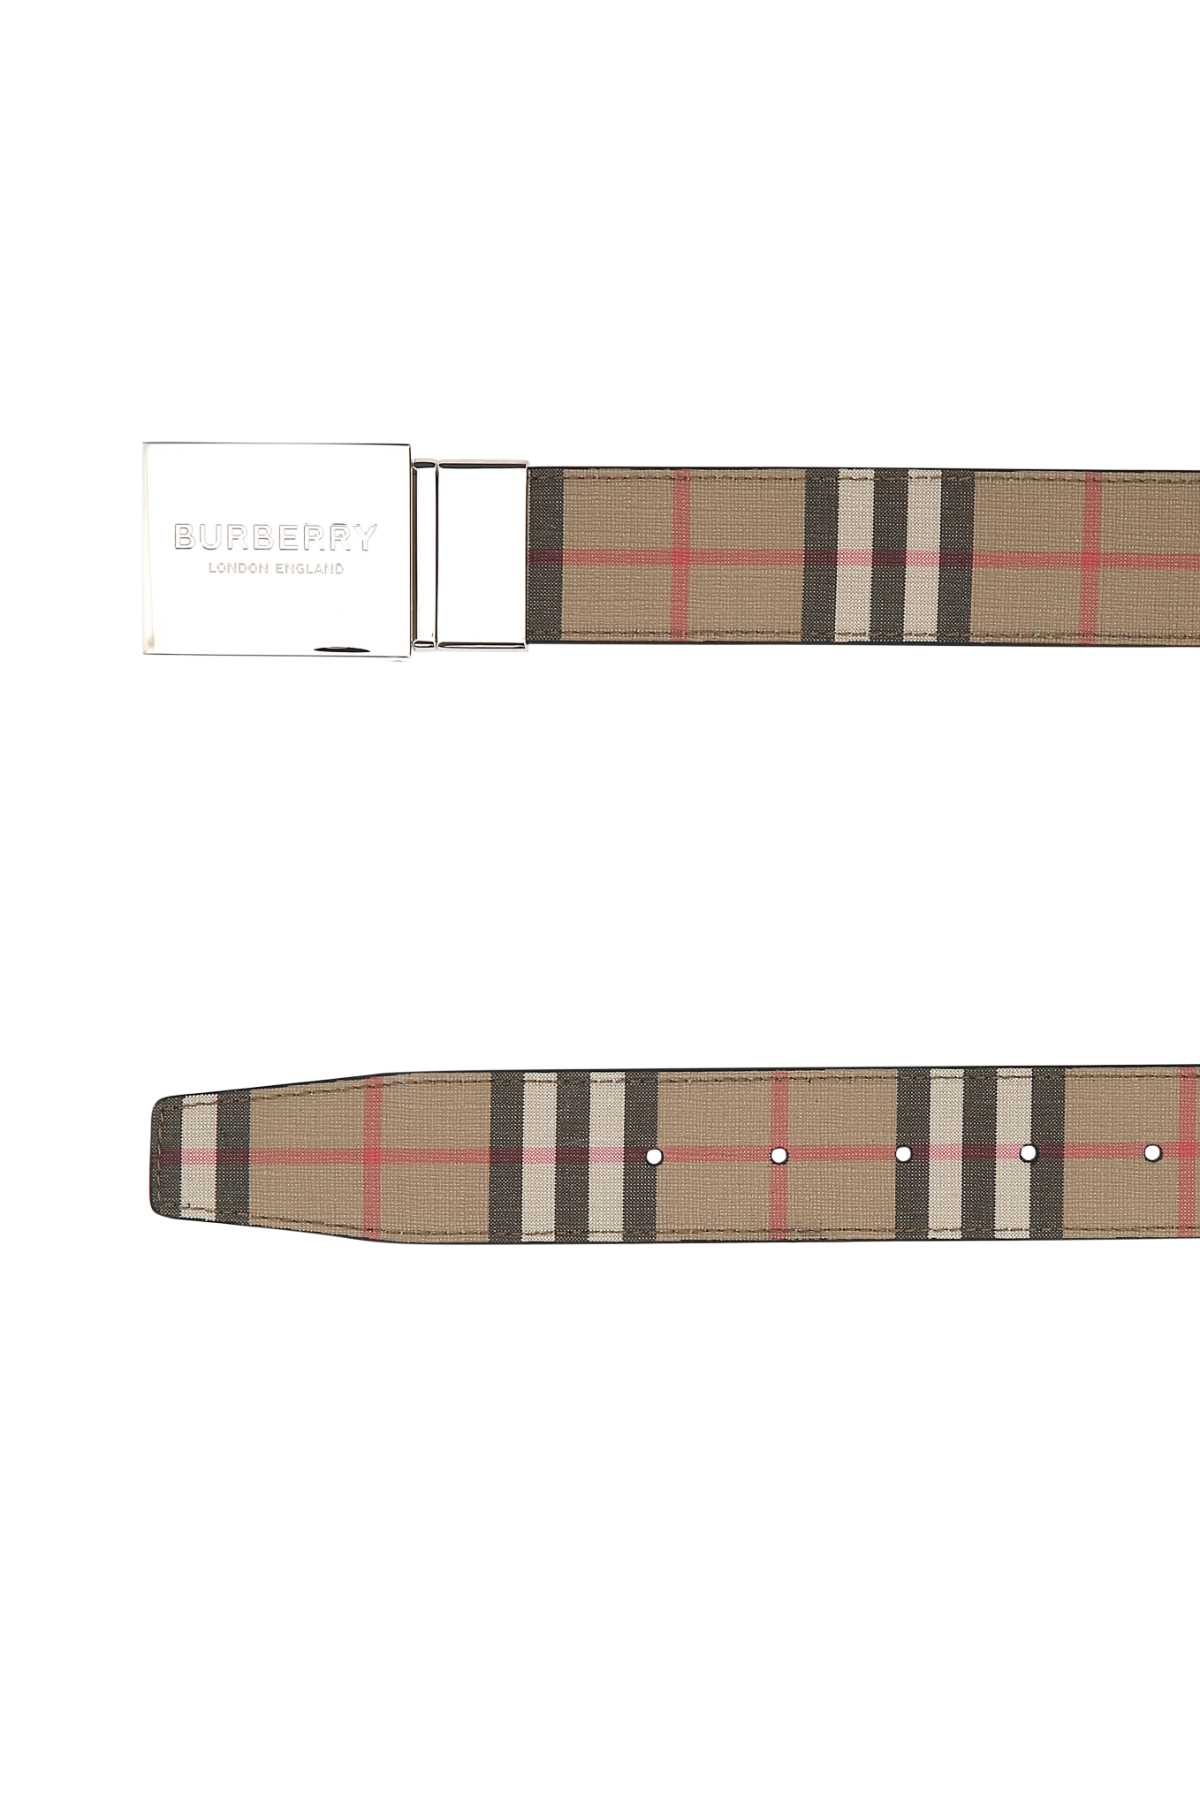 Burberry Printed E-canvas Belt In A7026